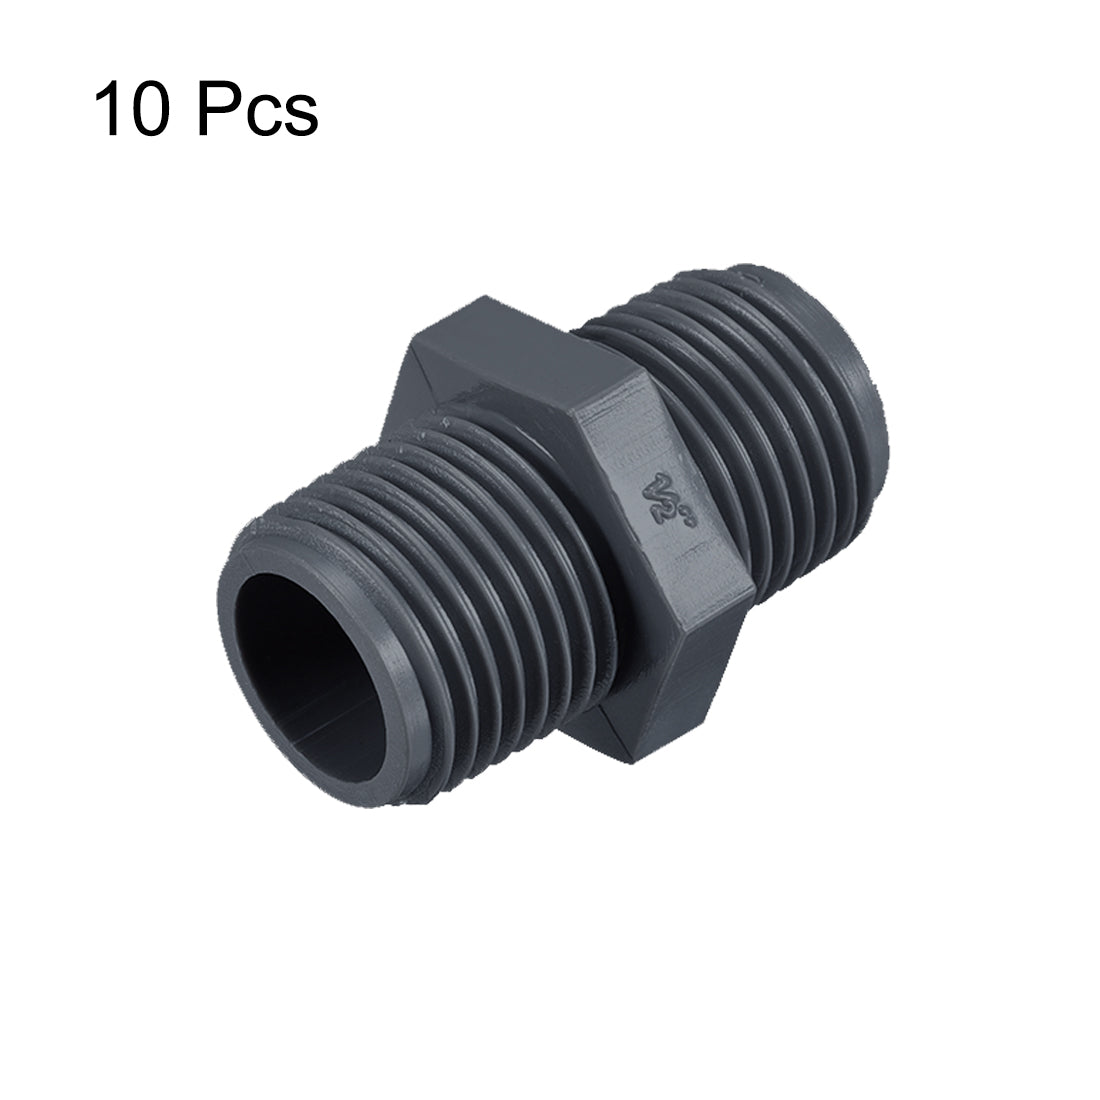 uxcell Uxcell Pipe Fittings Connector G1/2xG1/2 Male Thread Adapter Plastic Hex Connector 10pcs